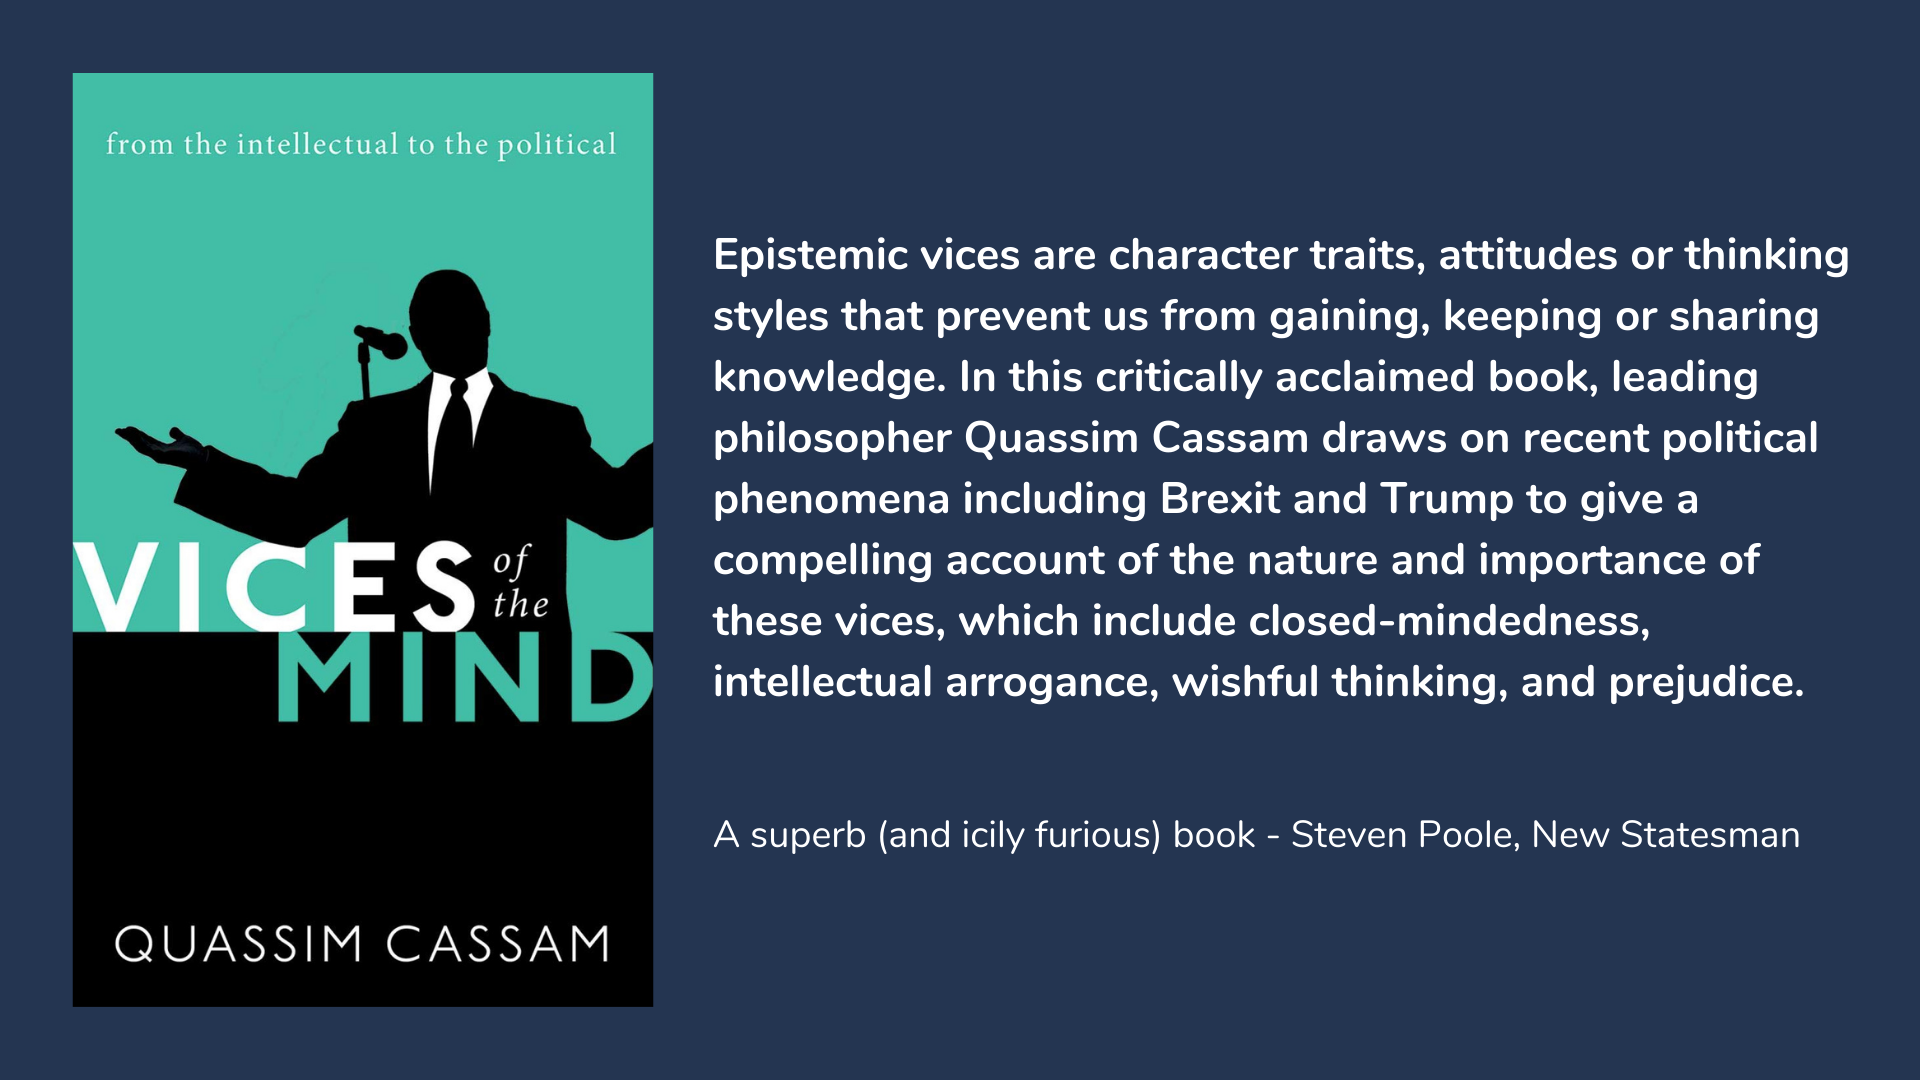 Vices of the Mind: From the Intellectual to the Political, book cover and description.